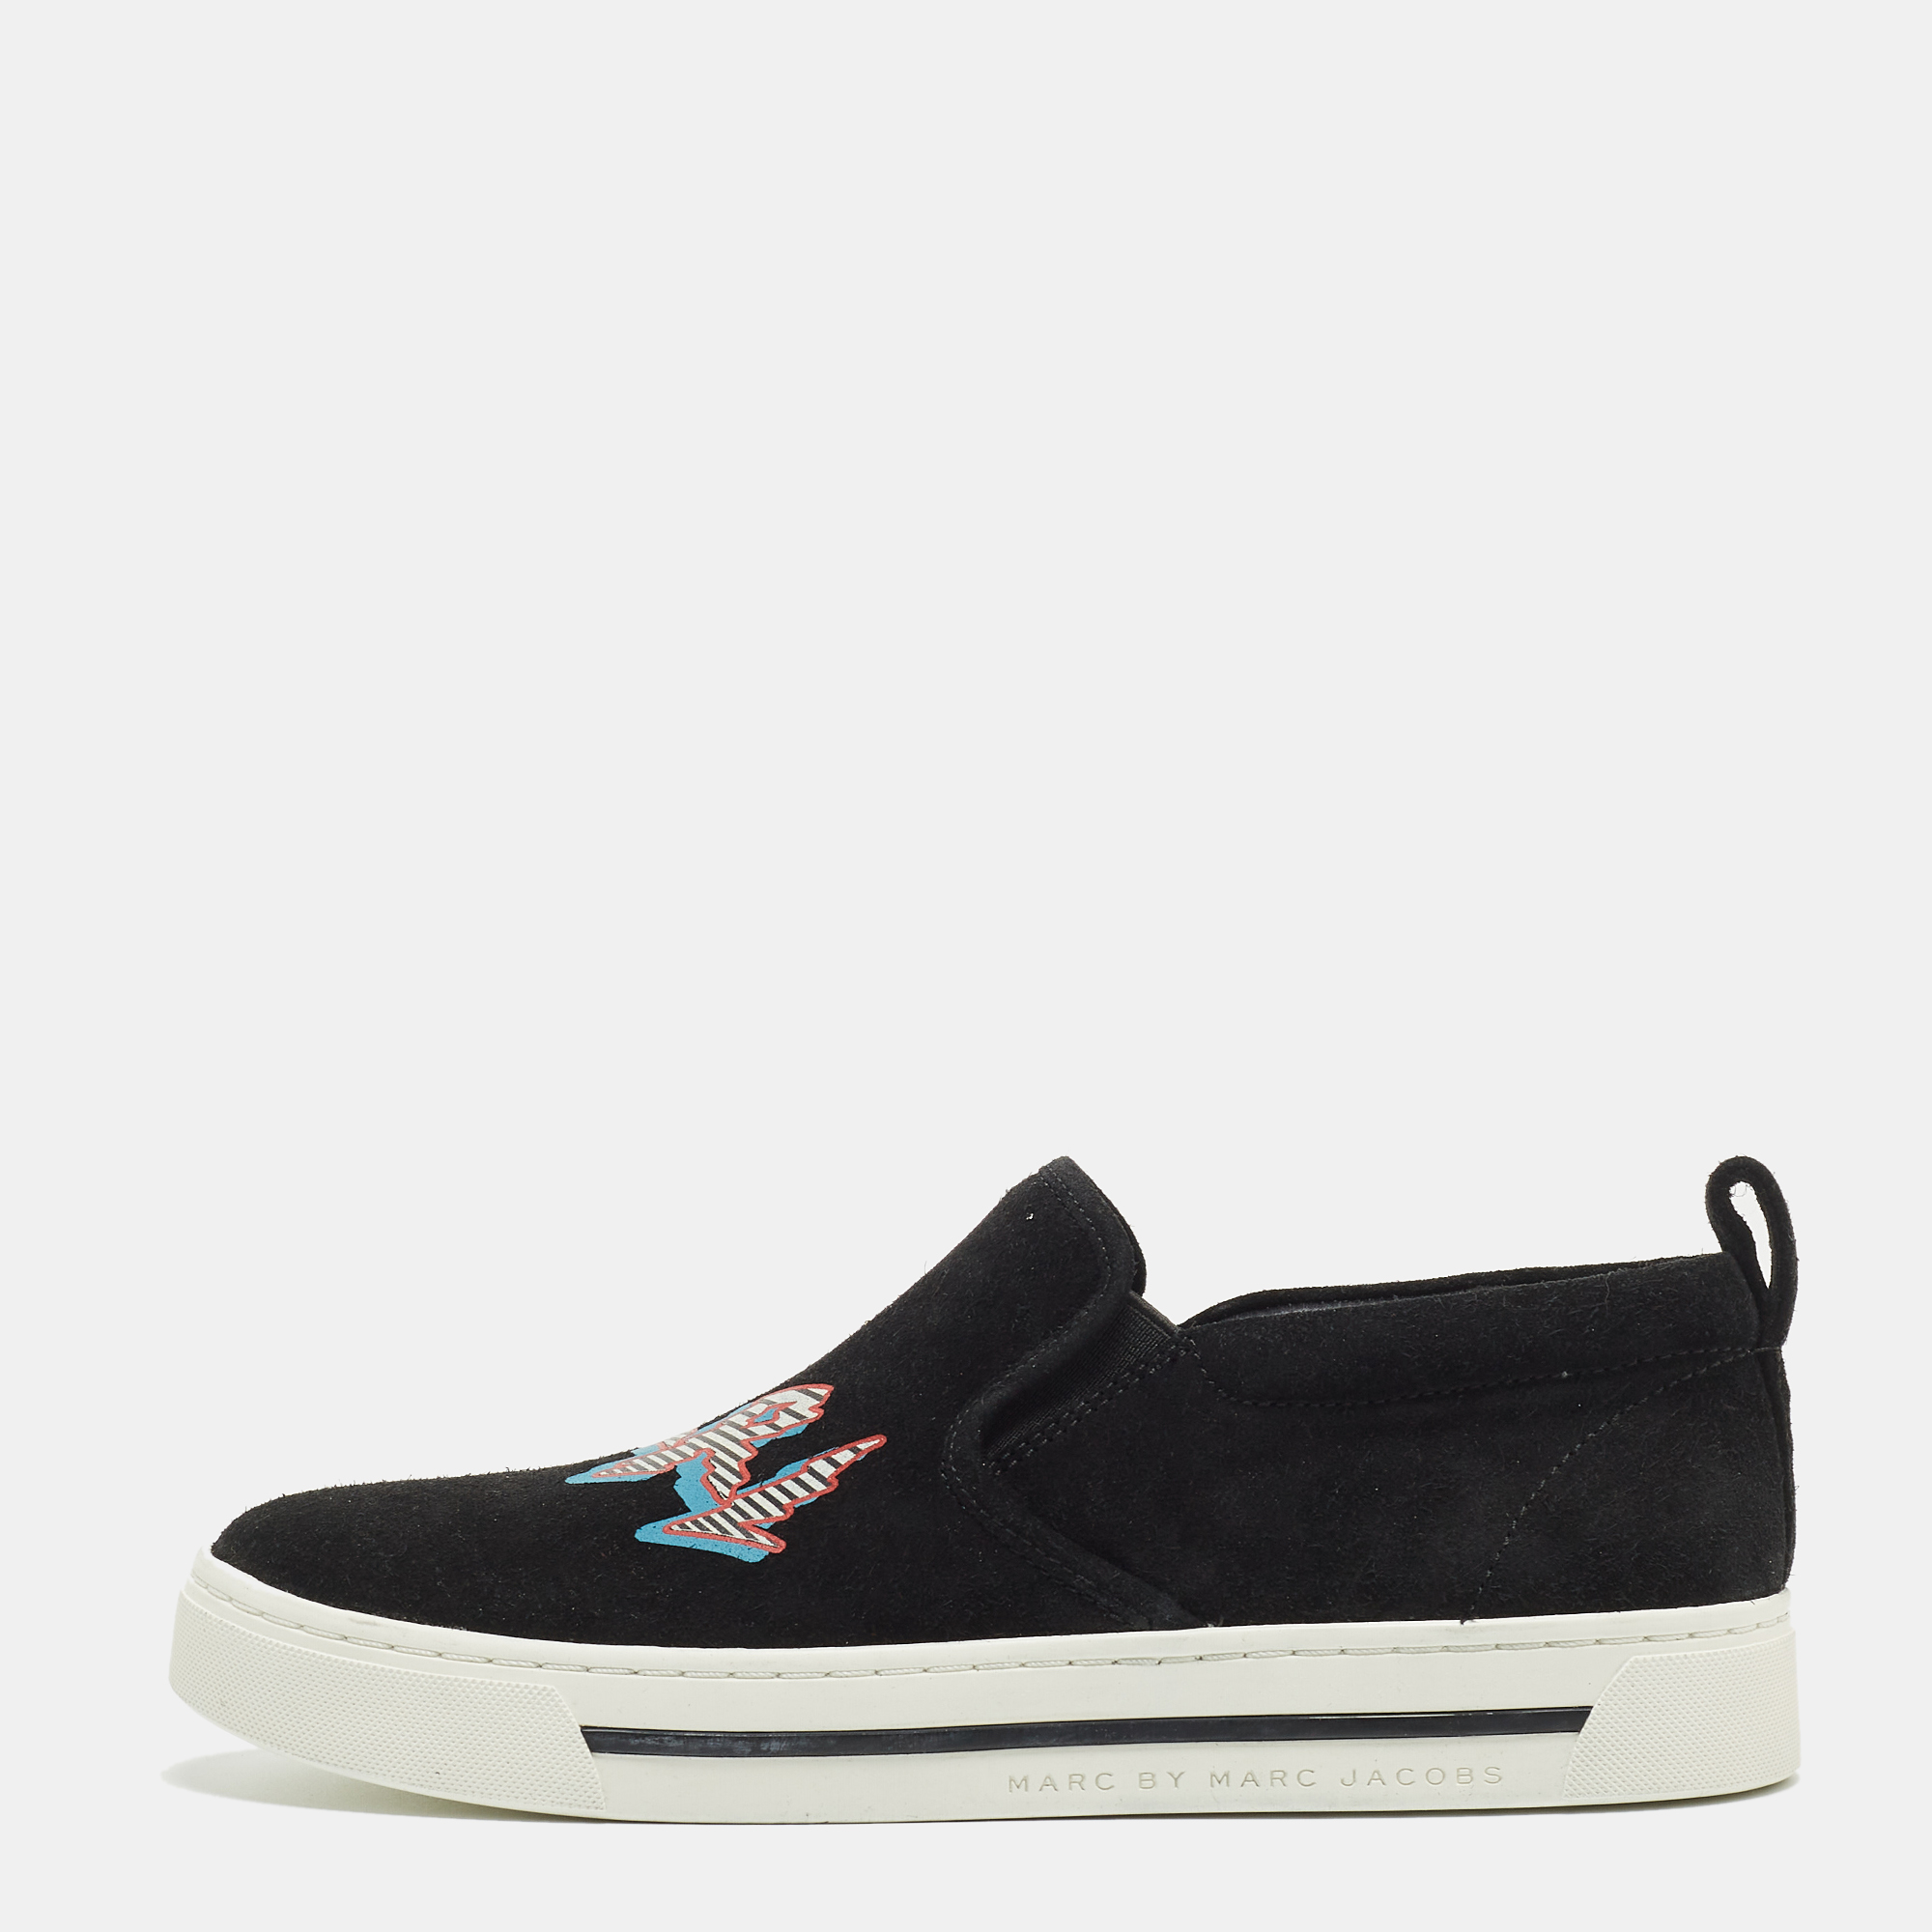 

Marc By Marc Jacobs Black Suede GRRL Slip On Sneakers Size